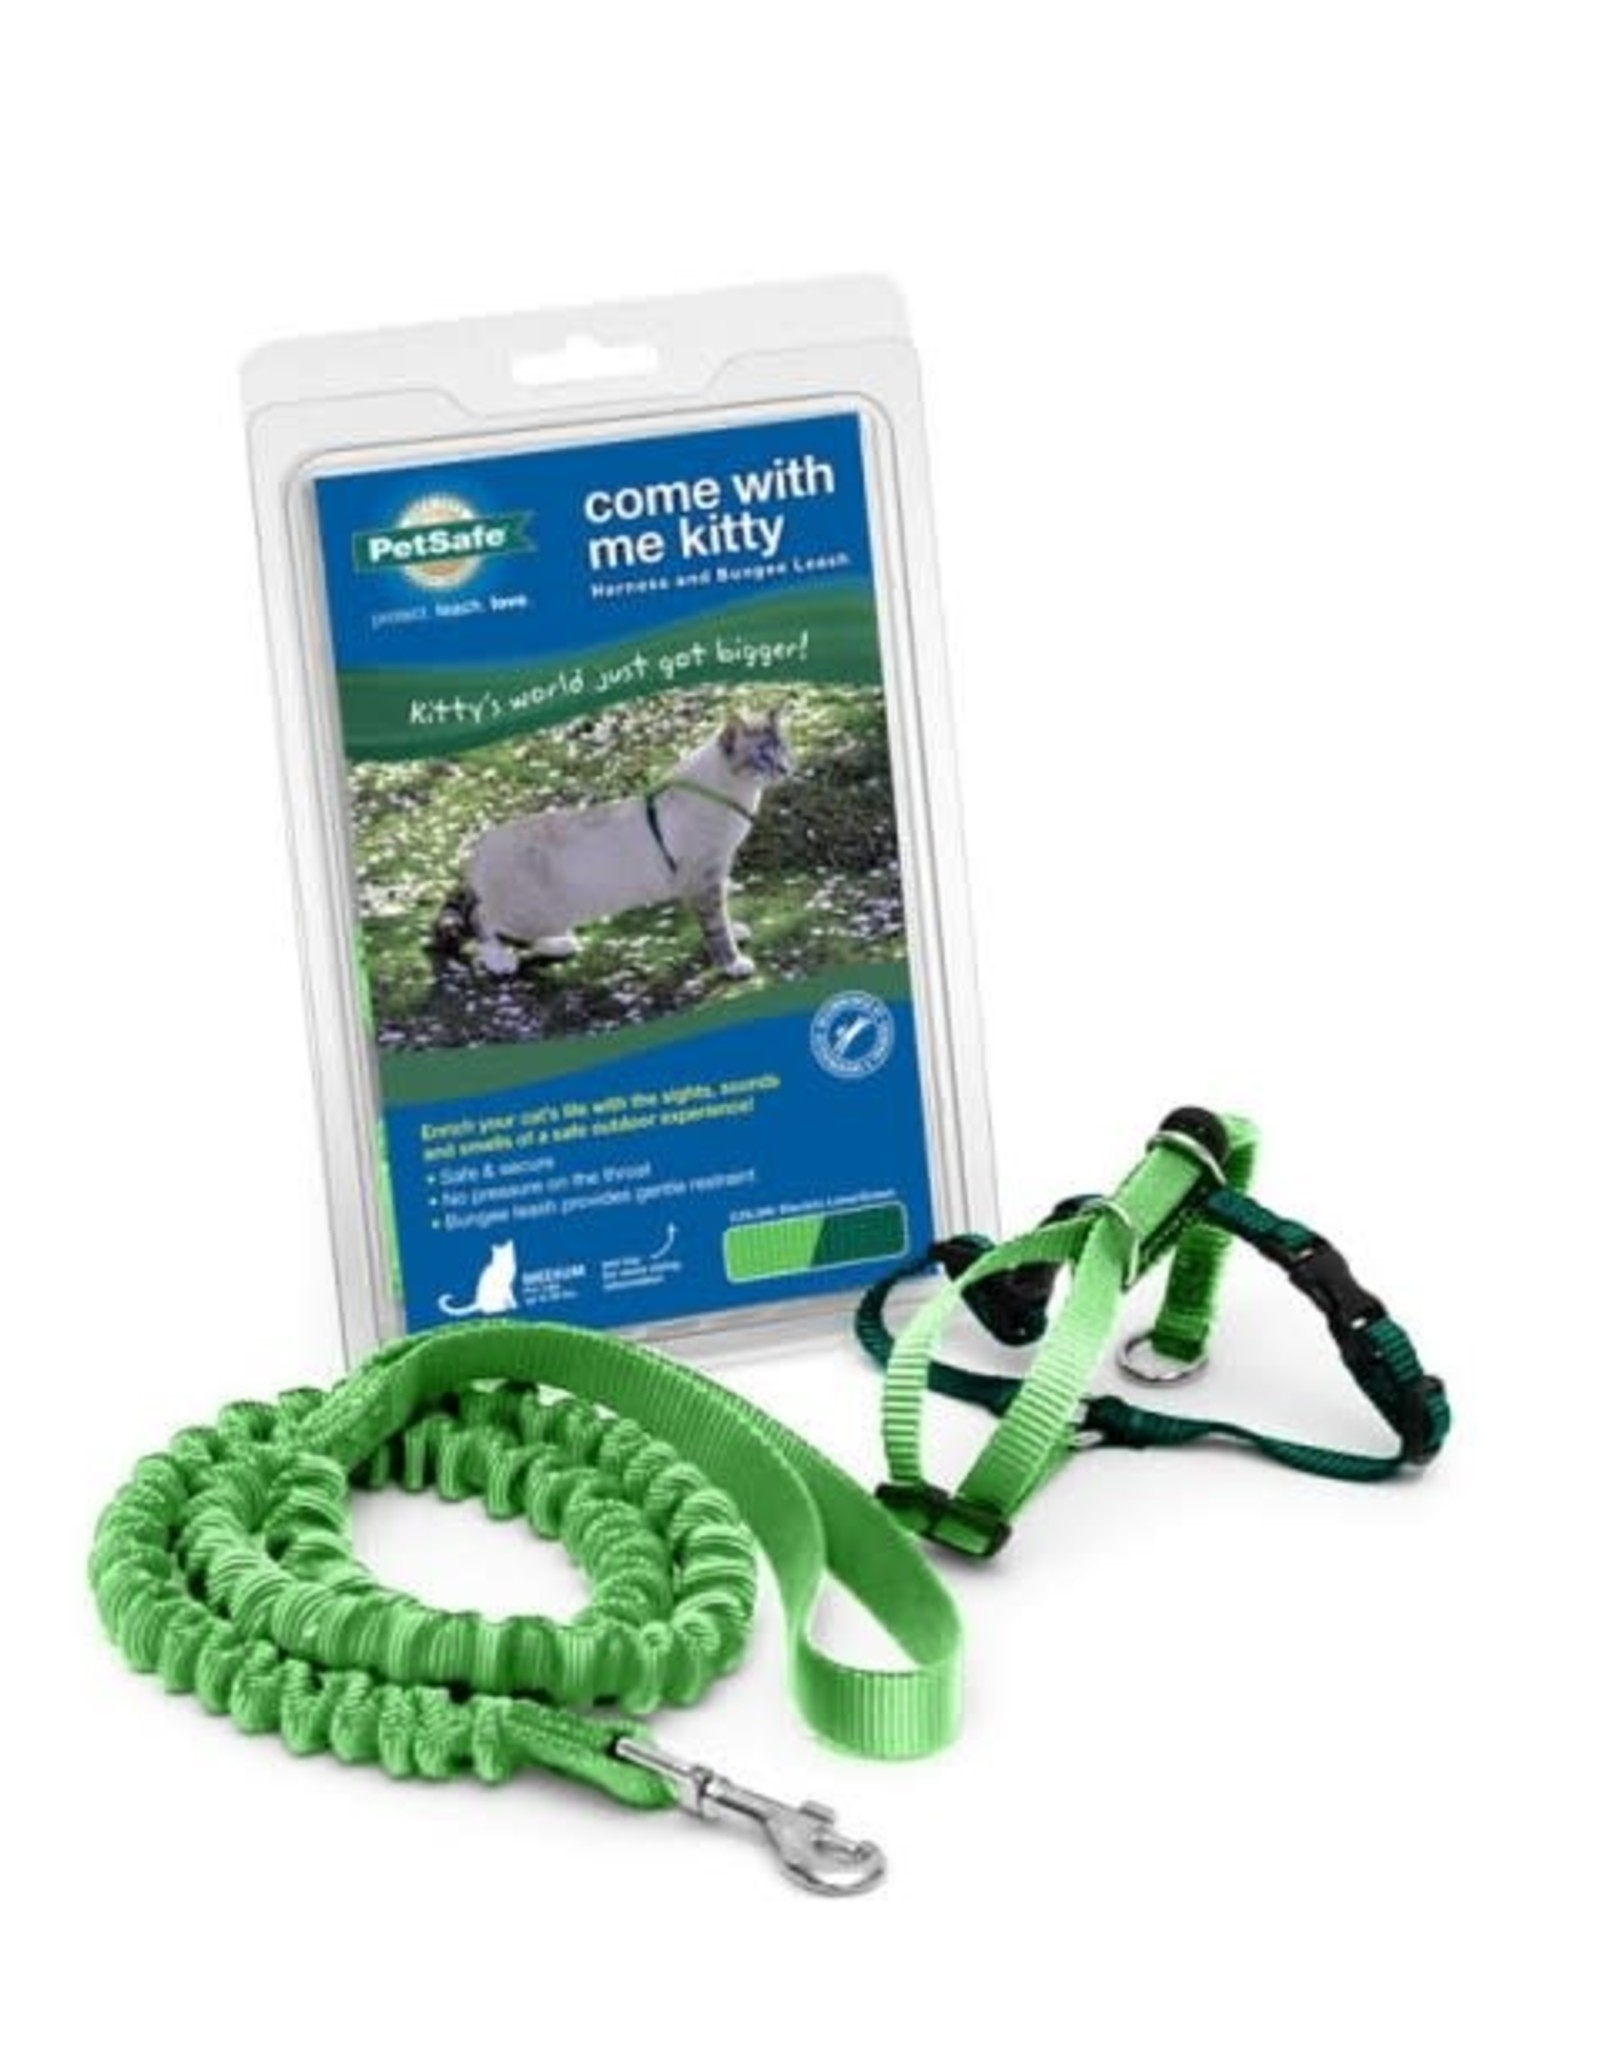 RADIO SYSTEMS CORP(PET SAFE) Come With Me Kitty Harness & Bungee Leash Medium Electric Lime